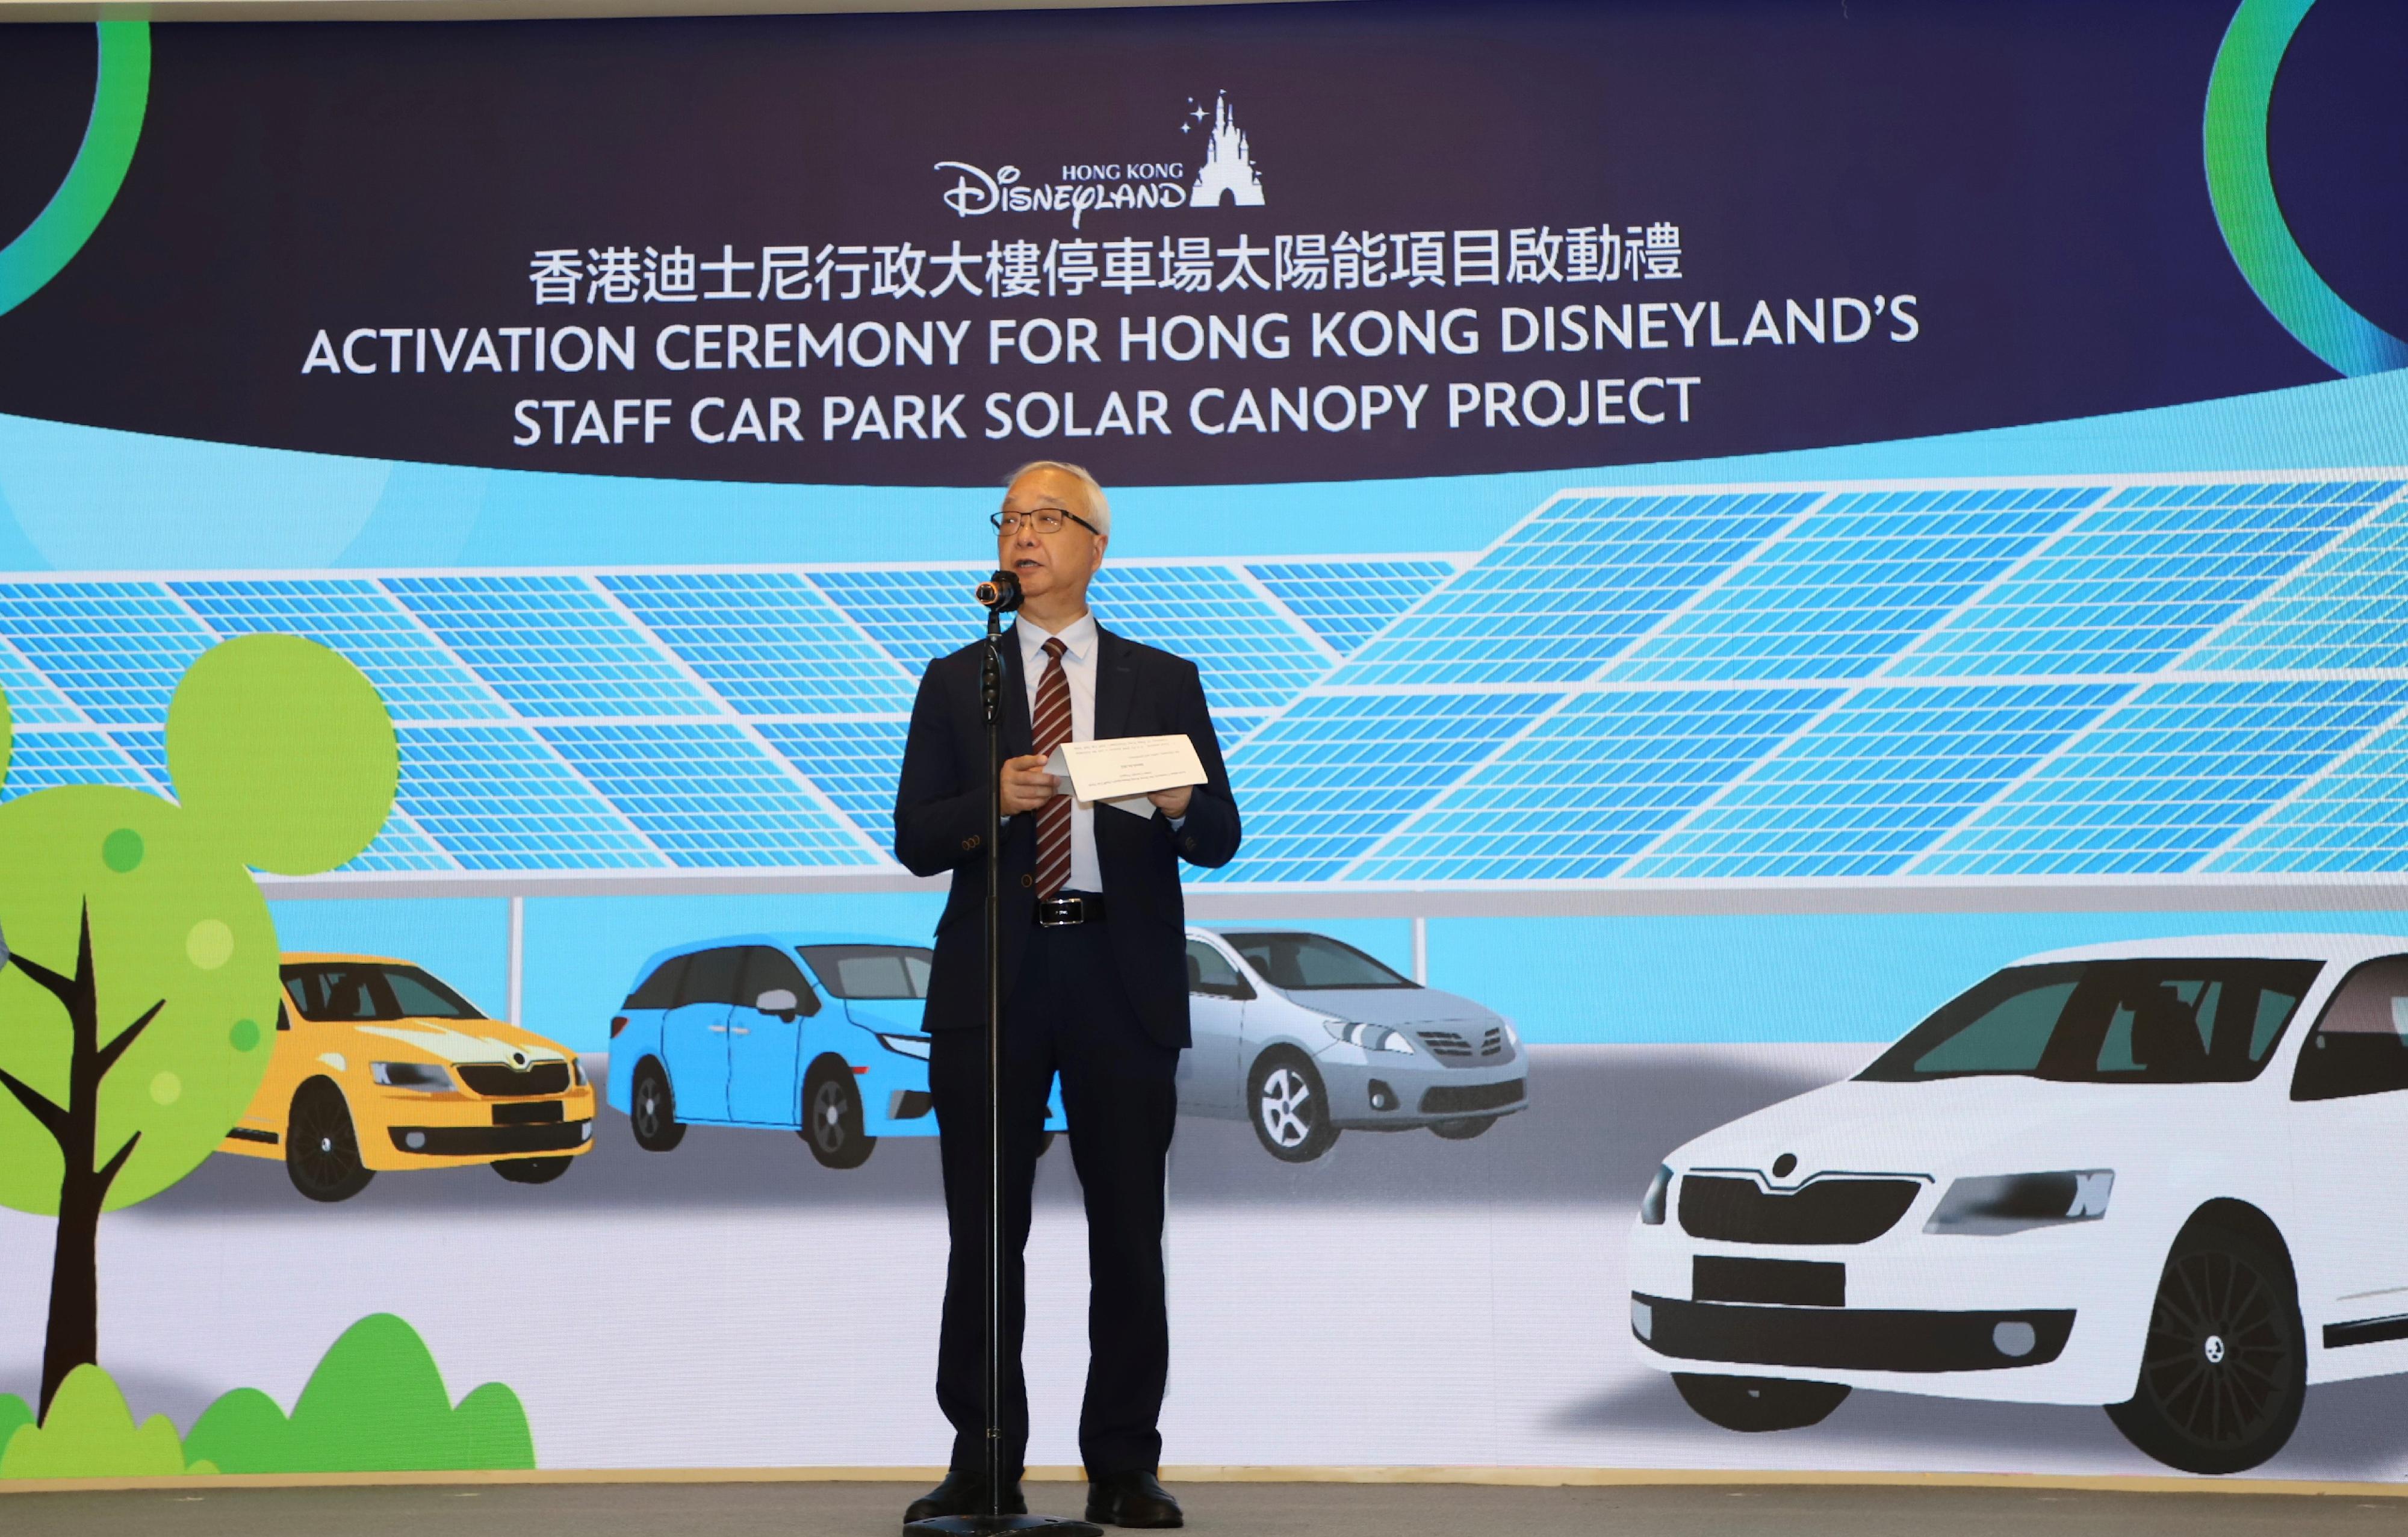 The Secretary for Environment and Ecology, Mr Tse Chin-wan, today (June 2) officiated at the activation ceremony for Hong Kong Disneyland's staff car park solar canopy project at Hong Kong Disneyland Resort. Photo shows Mr Tse delivering a speech at the activation ceremony.